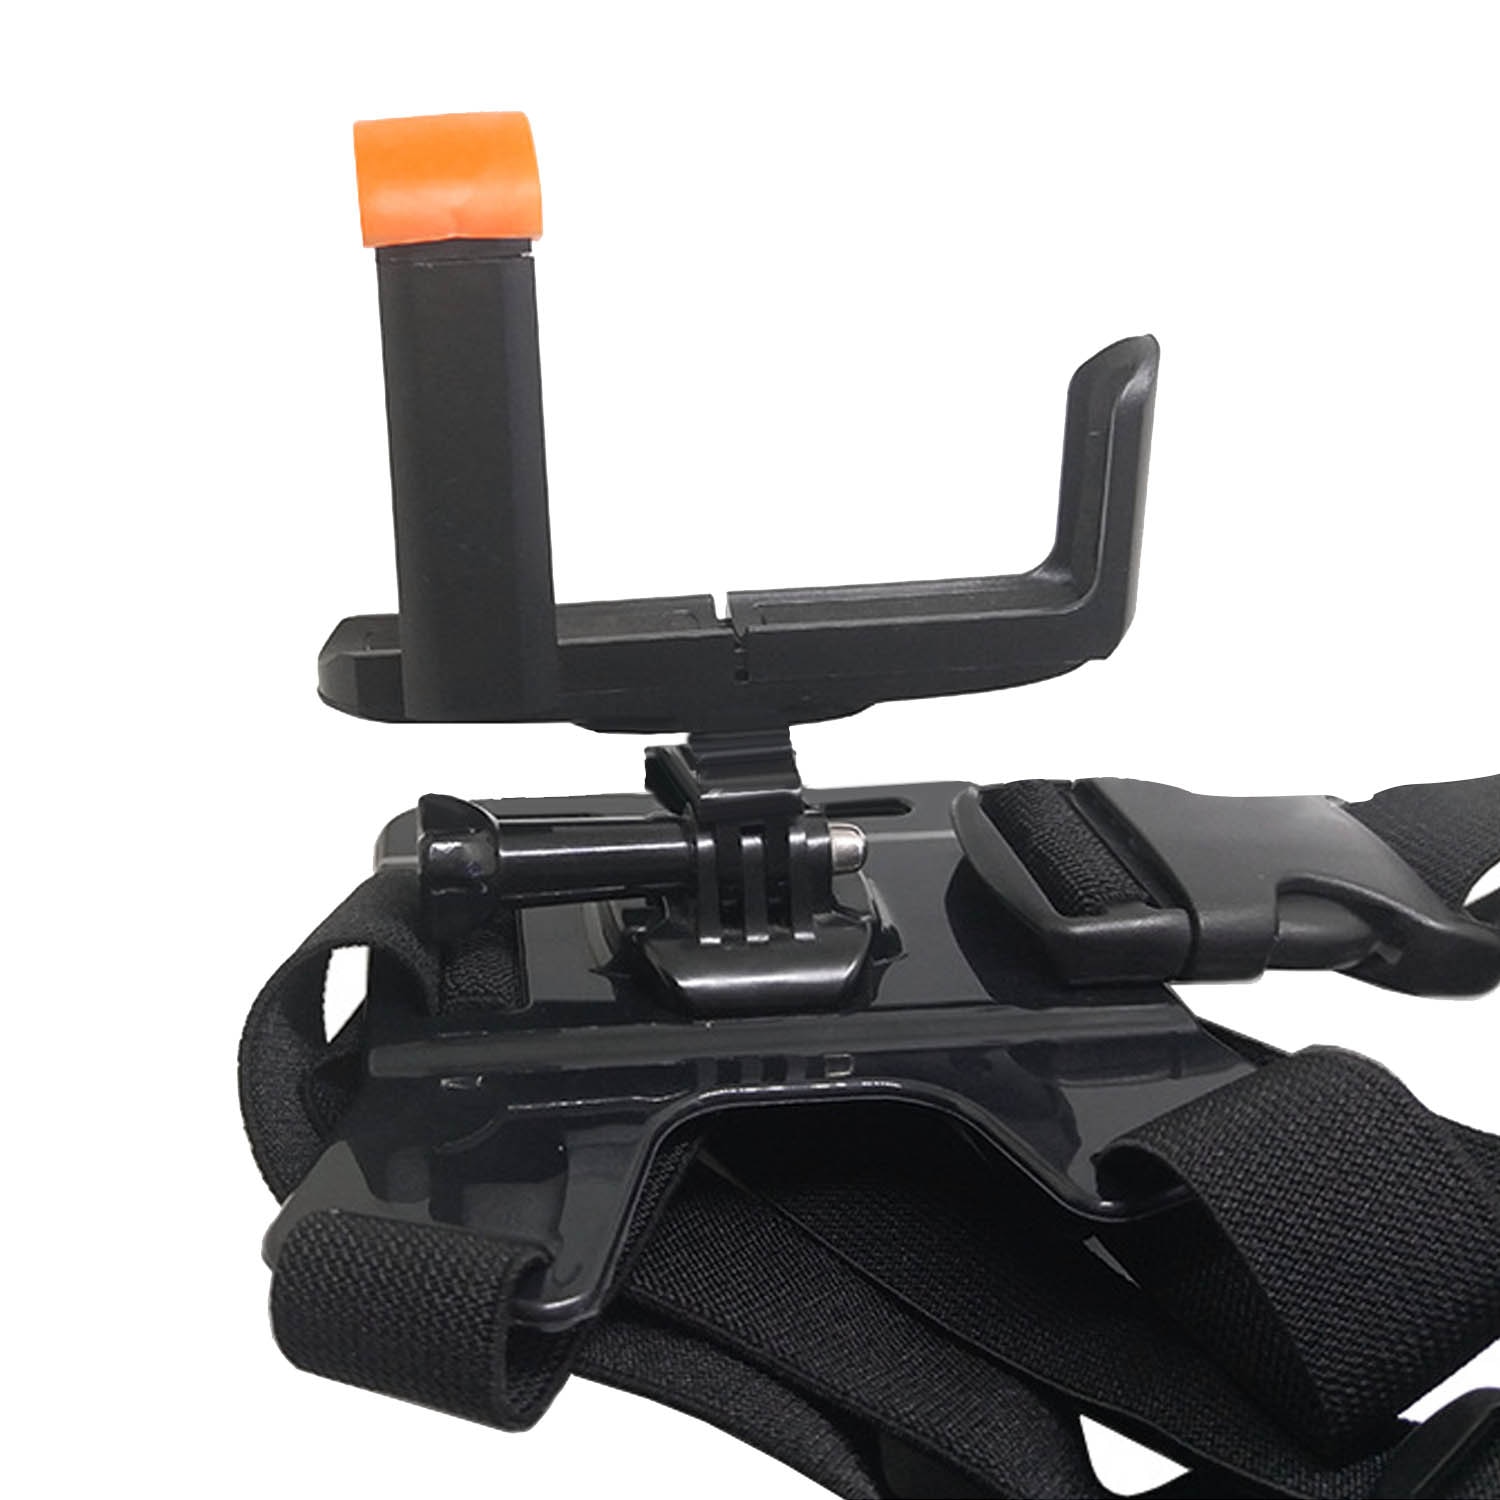 Gosear Adjustable Chest Mount Harness Strap w/ Phone Quick Clip Holder for iPhone GoPro Hero 6 4 3+ SJCAM YI Camera Accessory